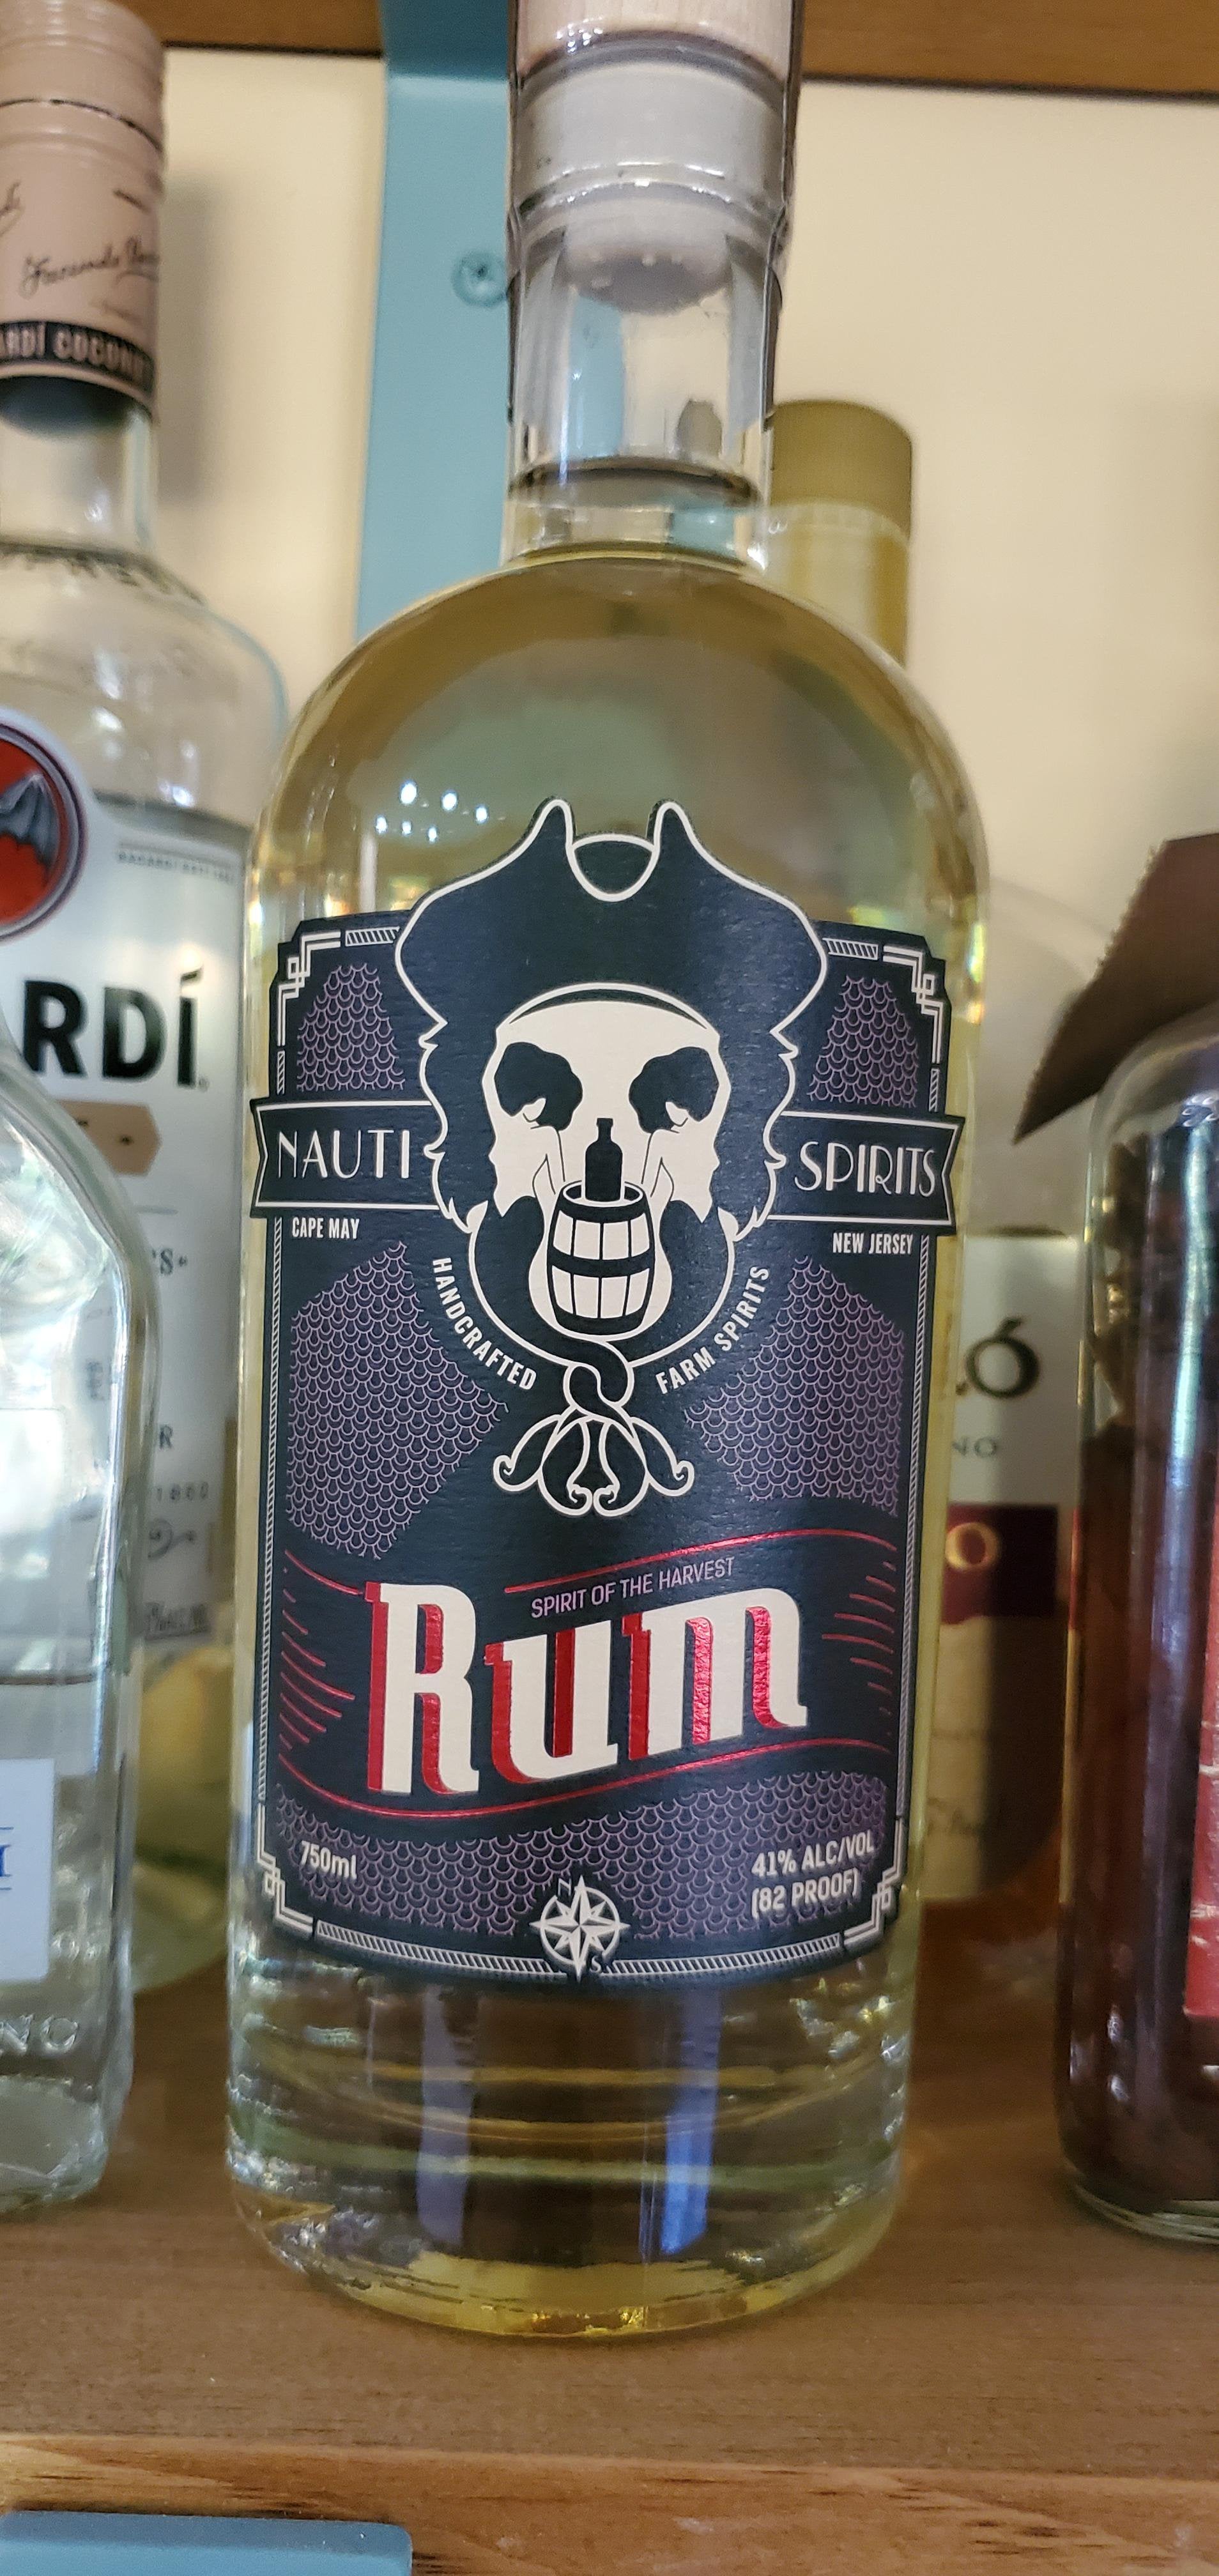 The clever logo on this bottle of Rum.